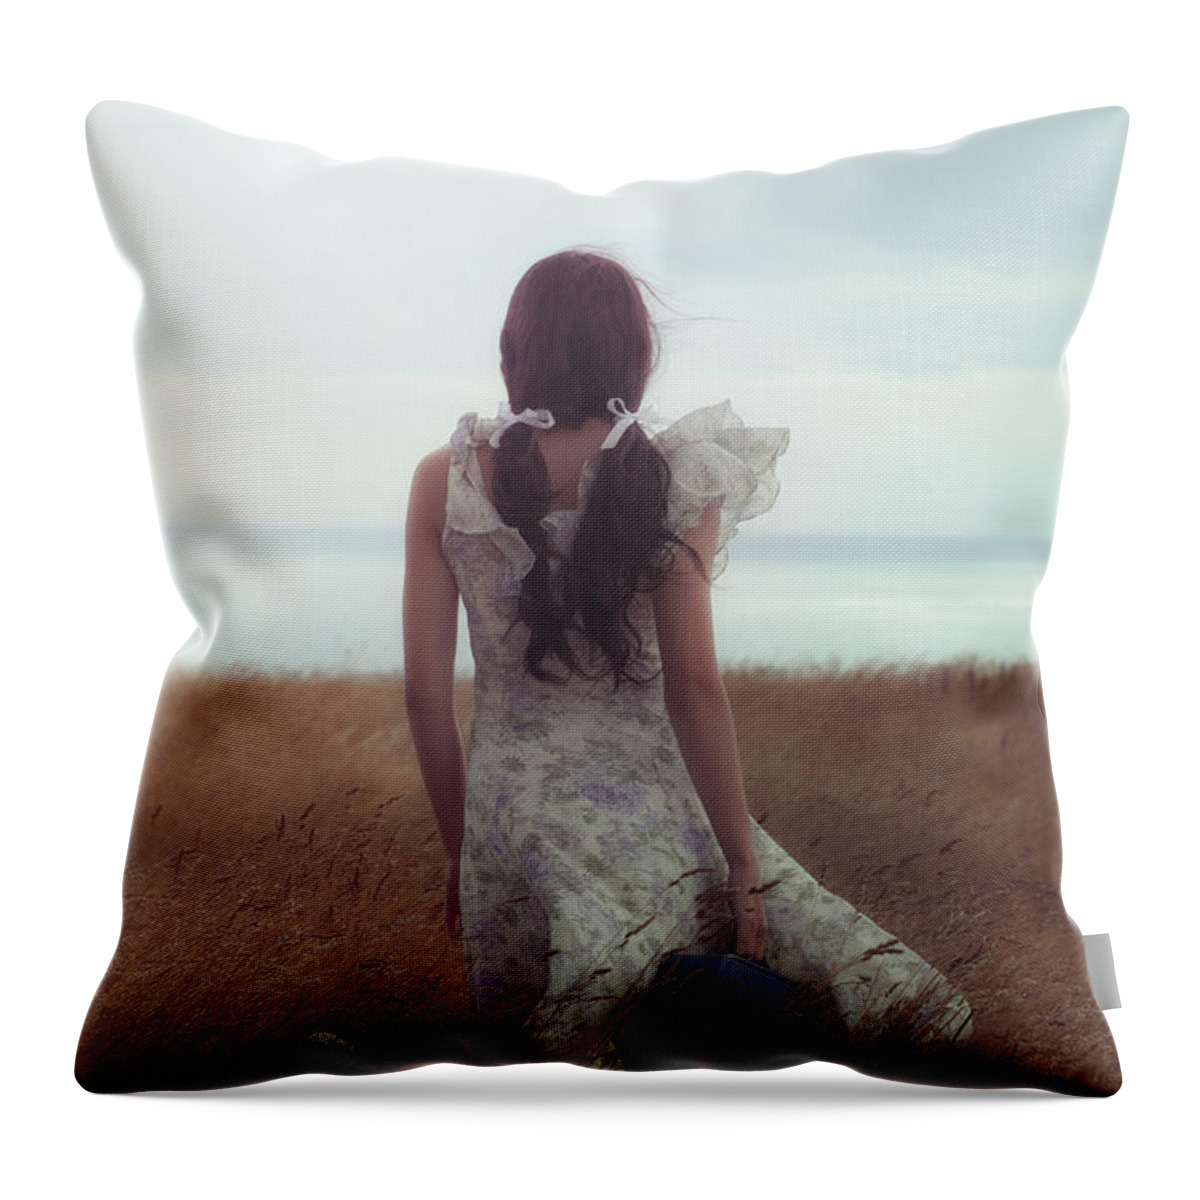 Girl Throw Pillow featuring the photograph Girl With Suitcase #2 by Joana Kruse